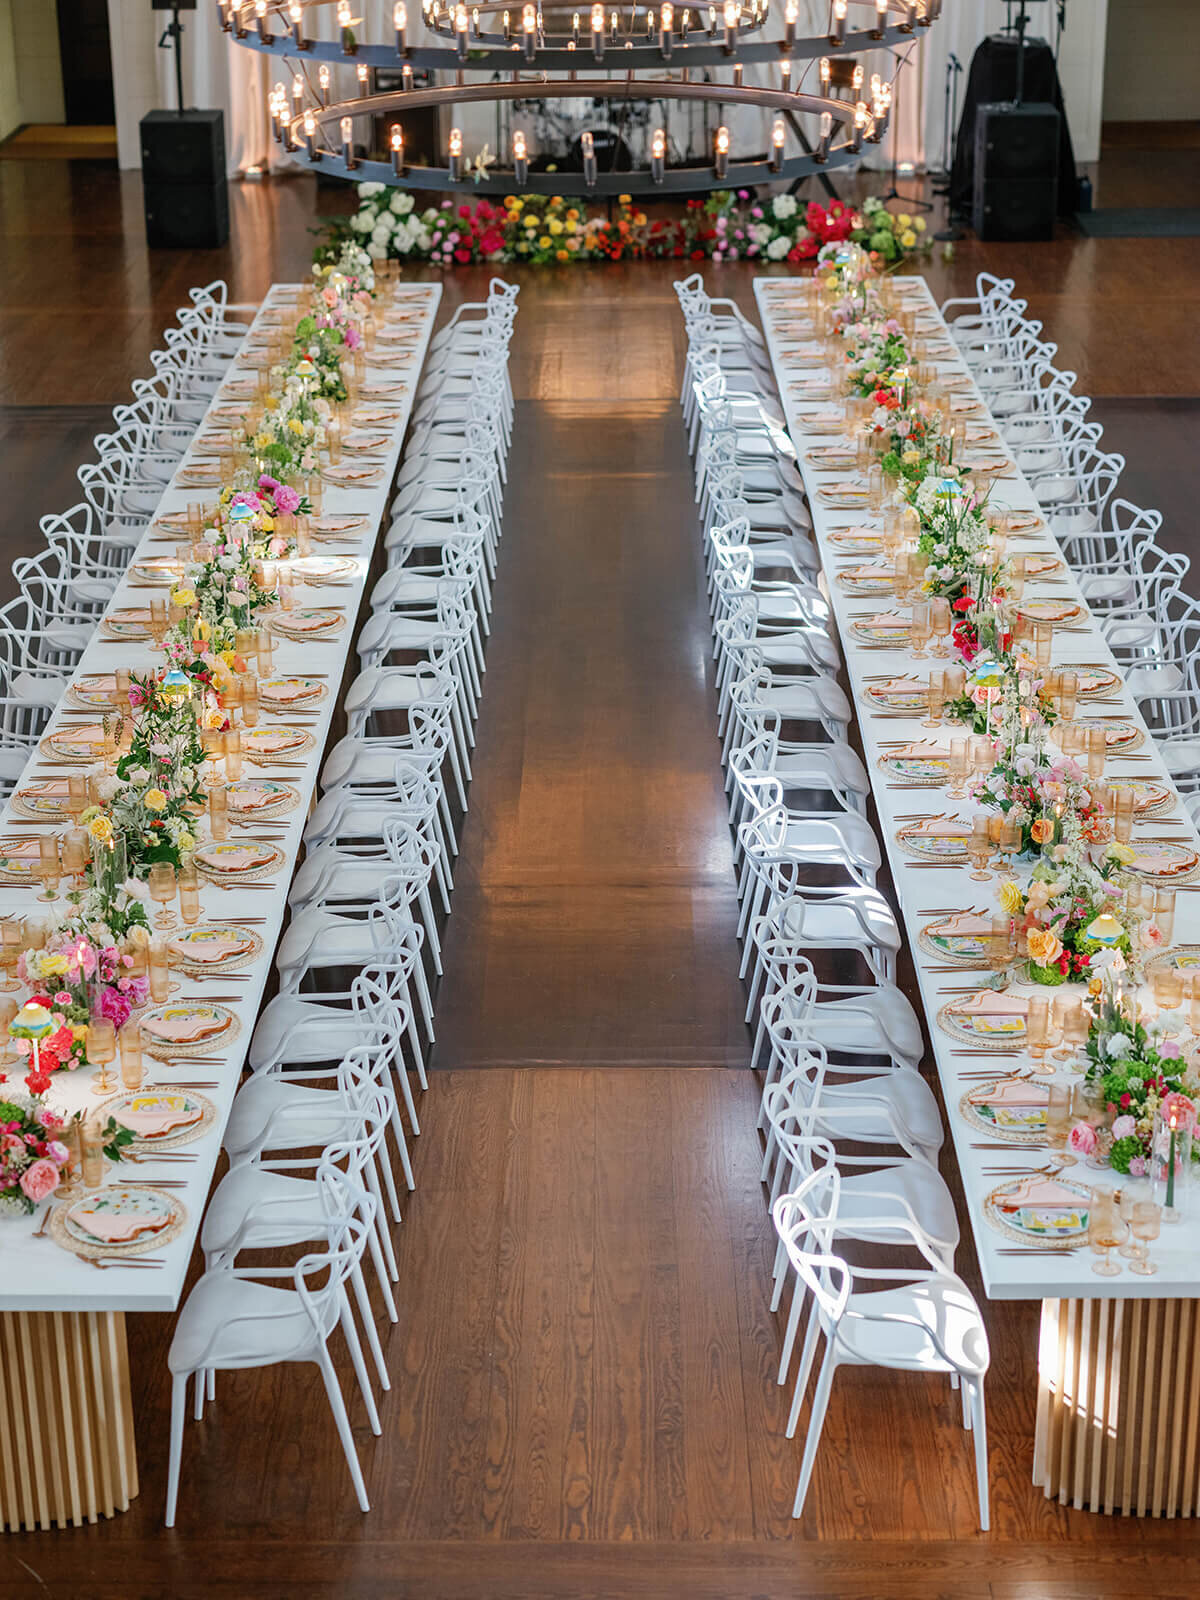 charlottesville-conference-wedding-events-industry-Pippin-Hill-fig-2-design-josh-and-dana-fernandez-photography-30